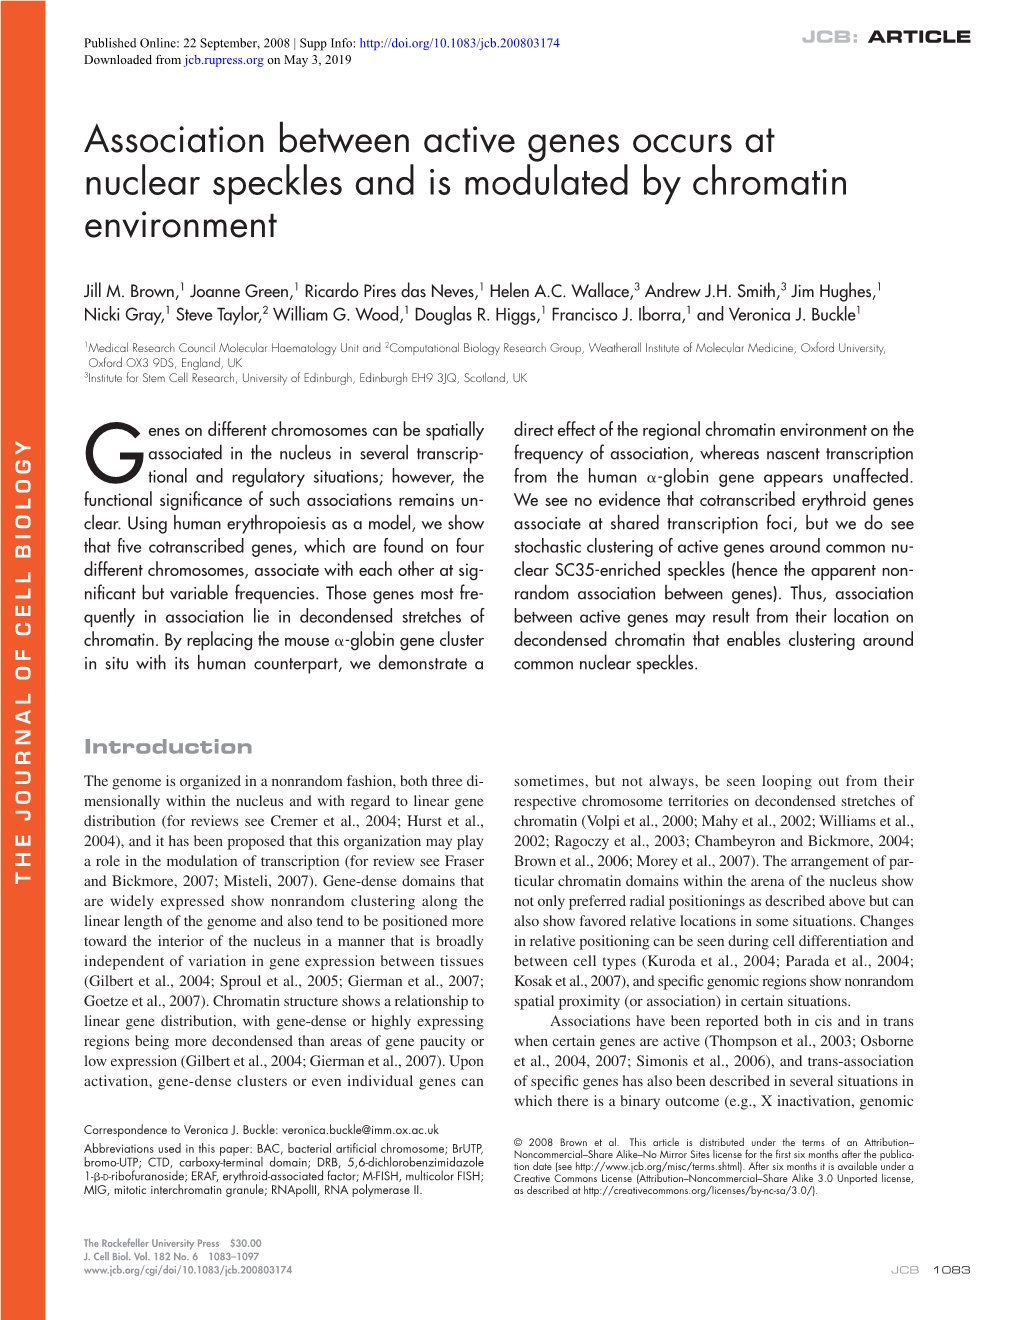 Association Between Active Genes Occurs at Nuclear Speckles